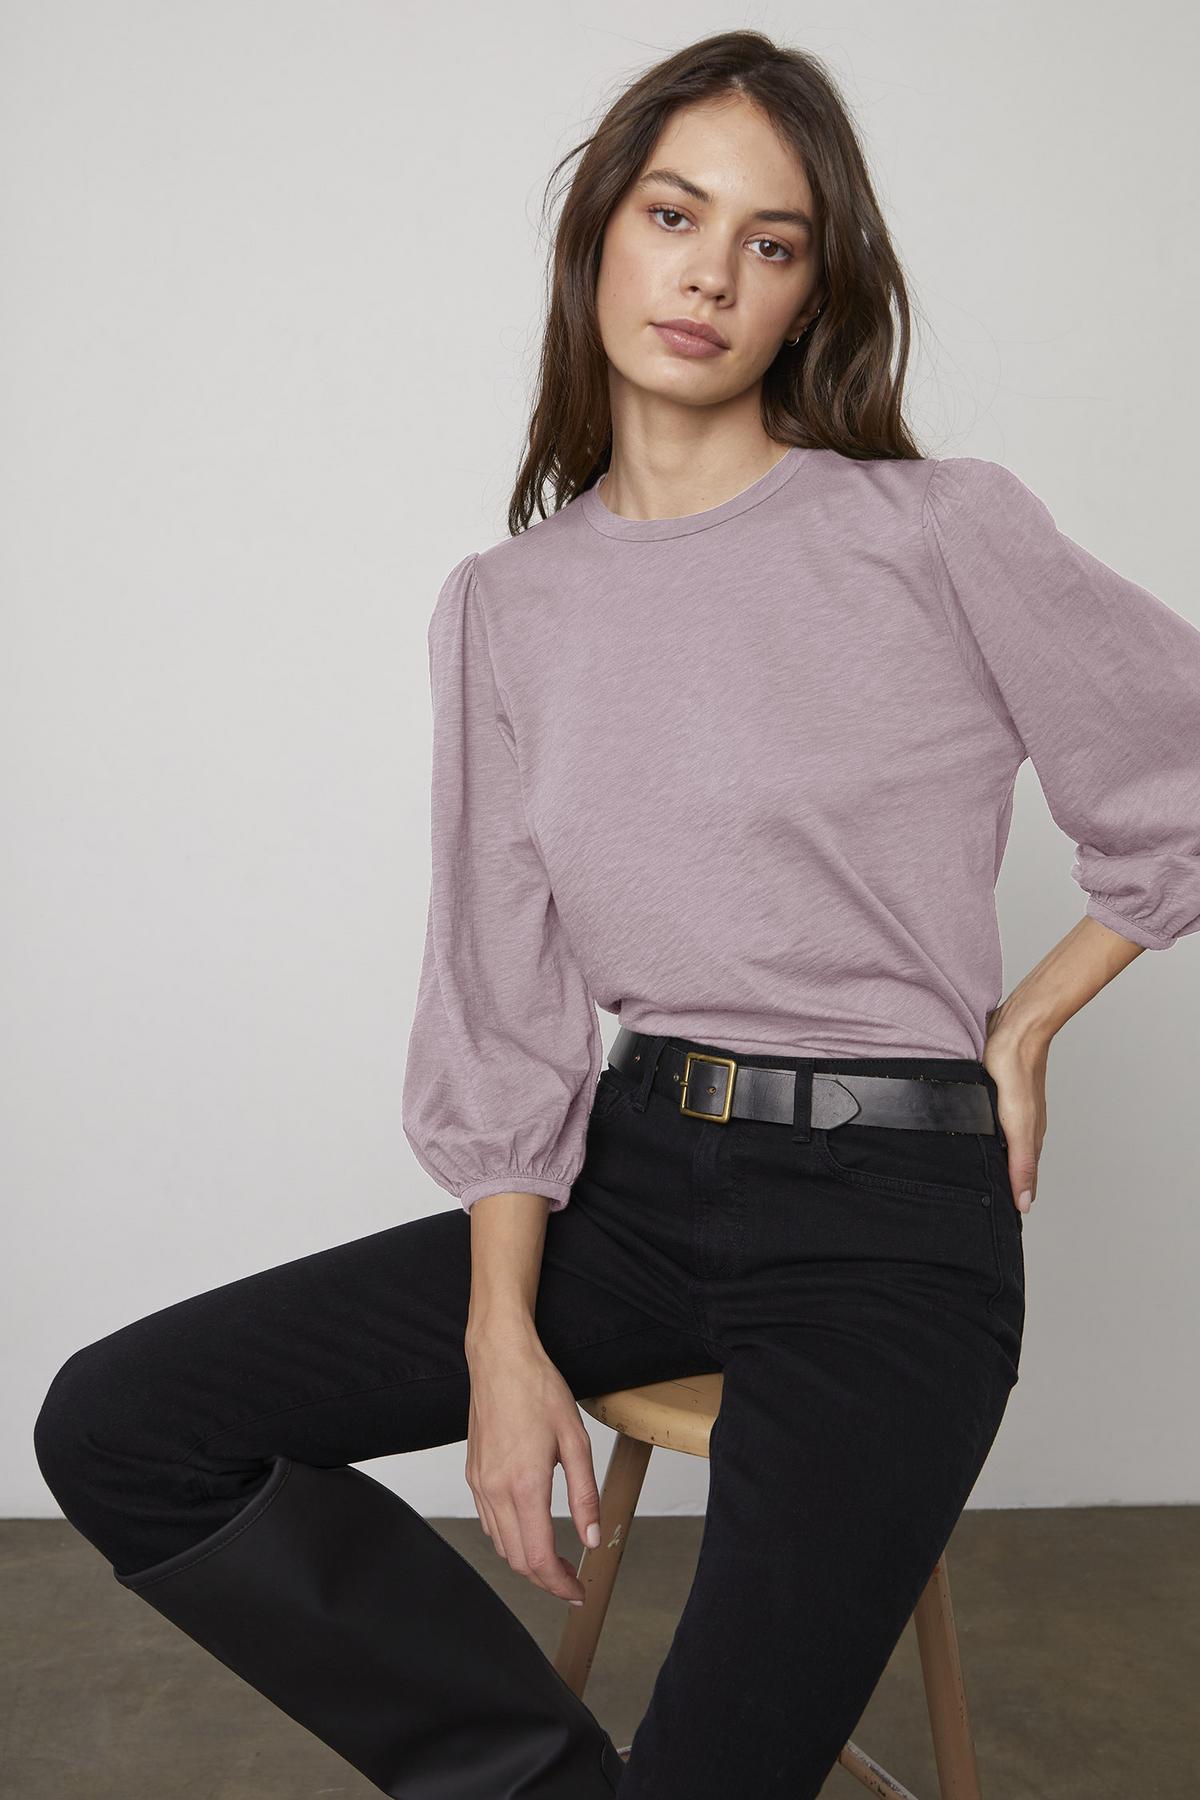 The model is wearing an ANETTE PUFF SLEEVE TEE in cotton slub knit from Velvet by Graham & Spencer.-35416302649537